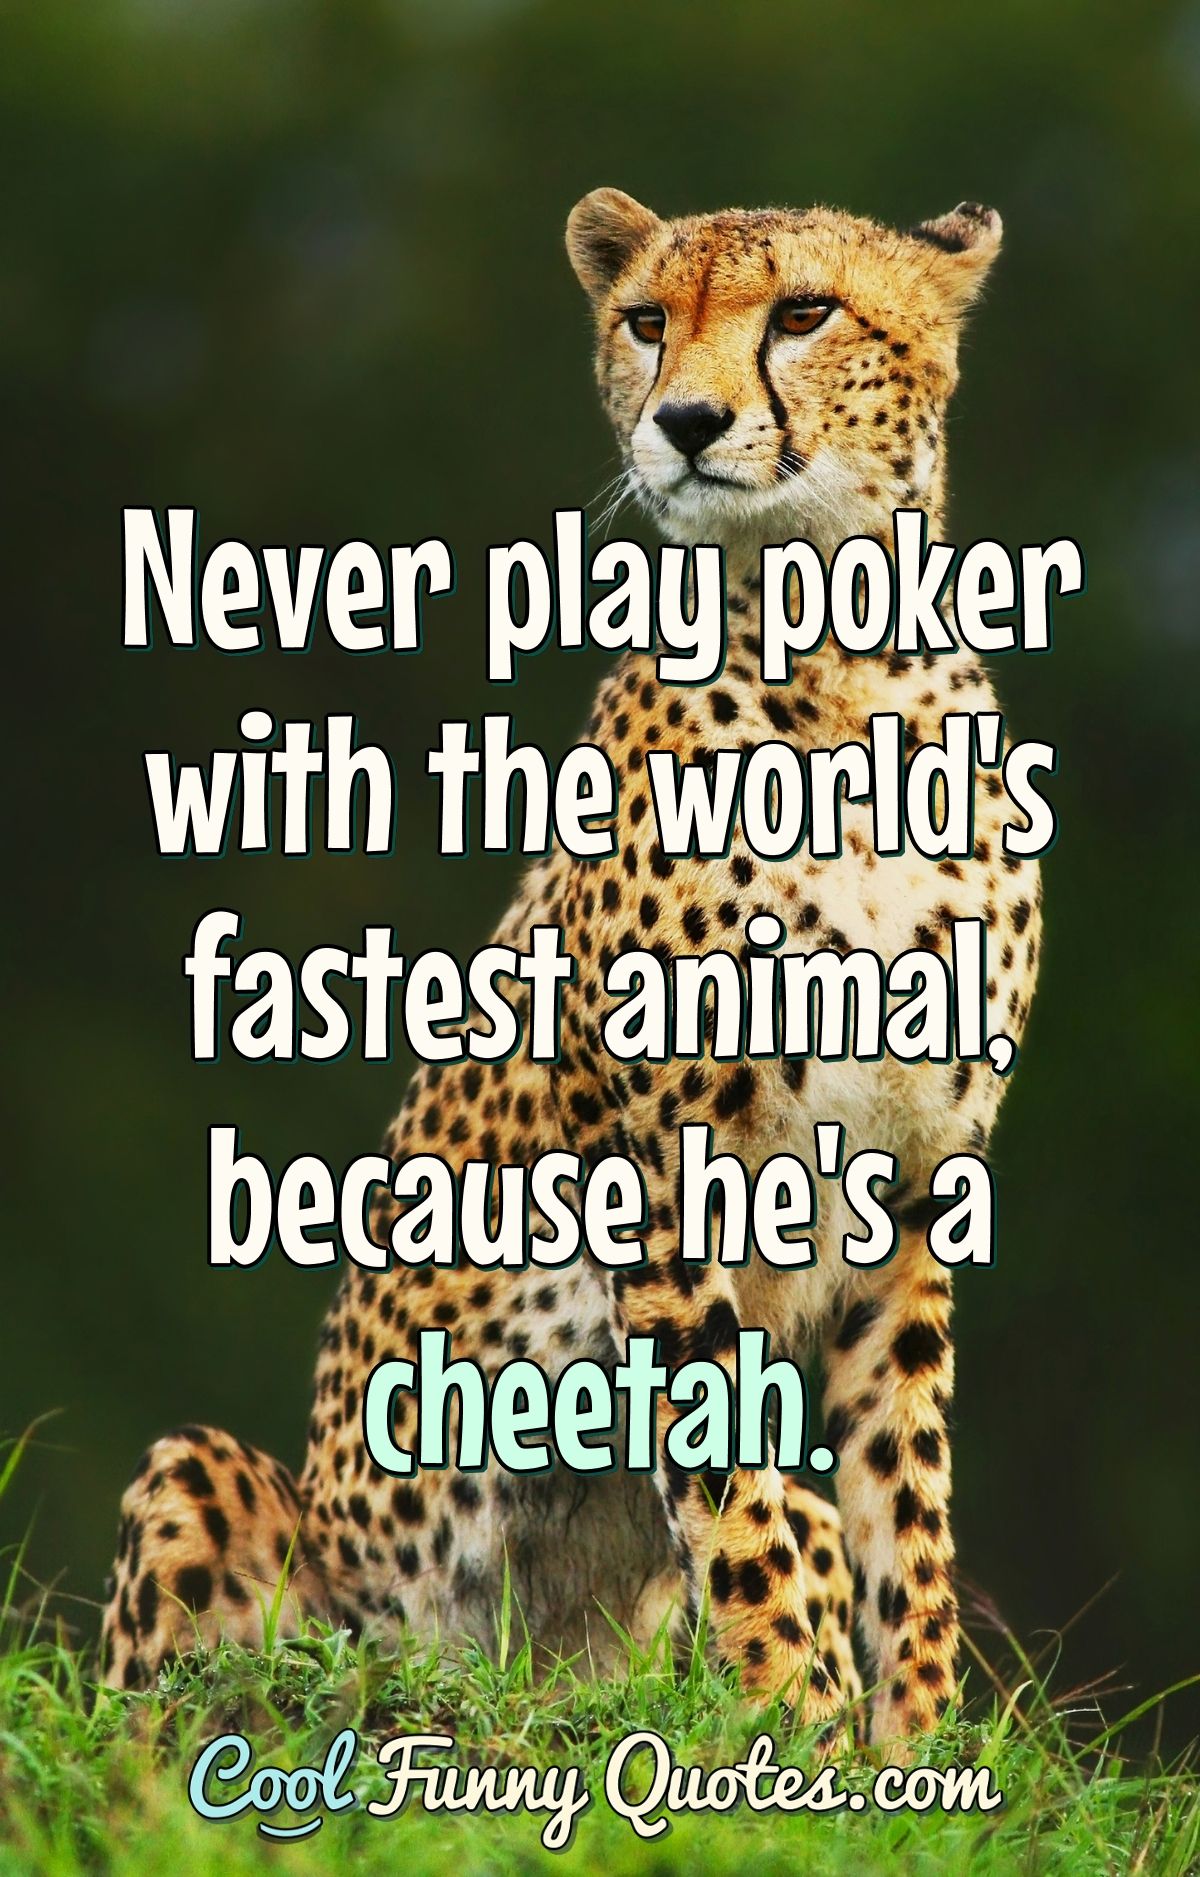 Never play poker with the world's fastest animal, because he's a cheetah.